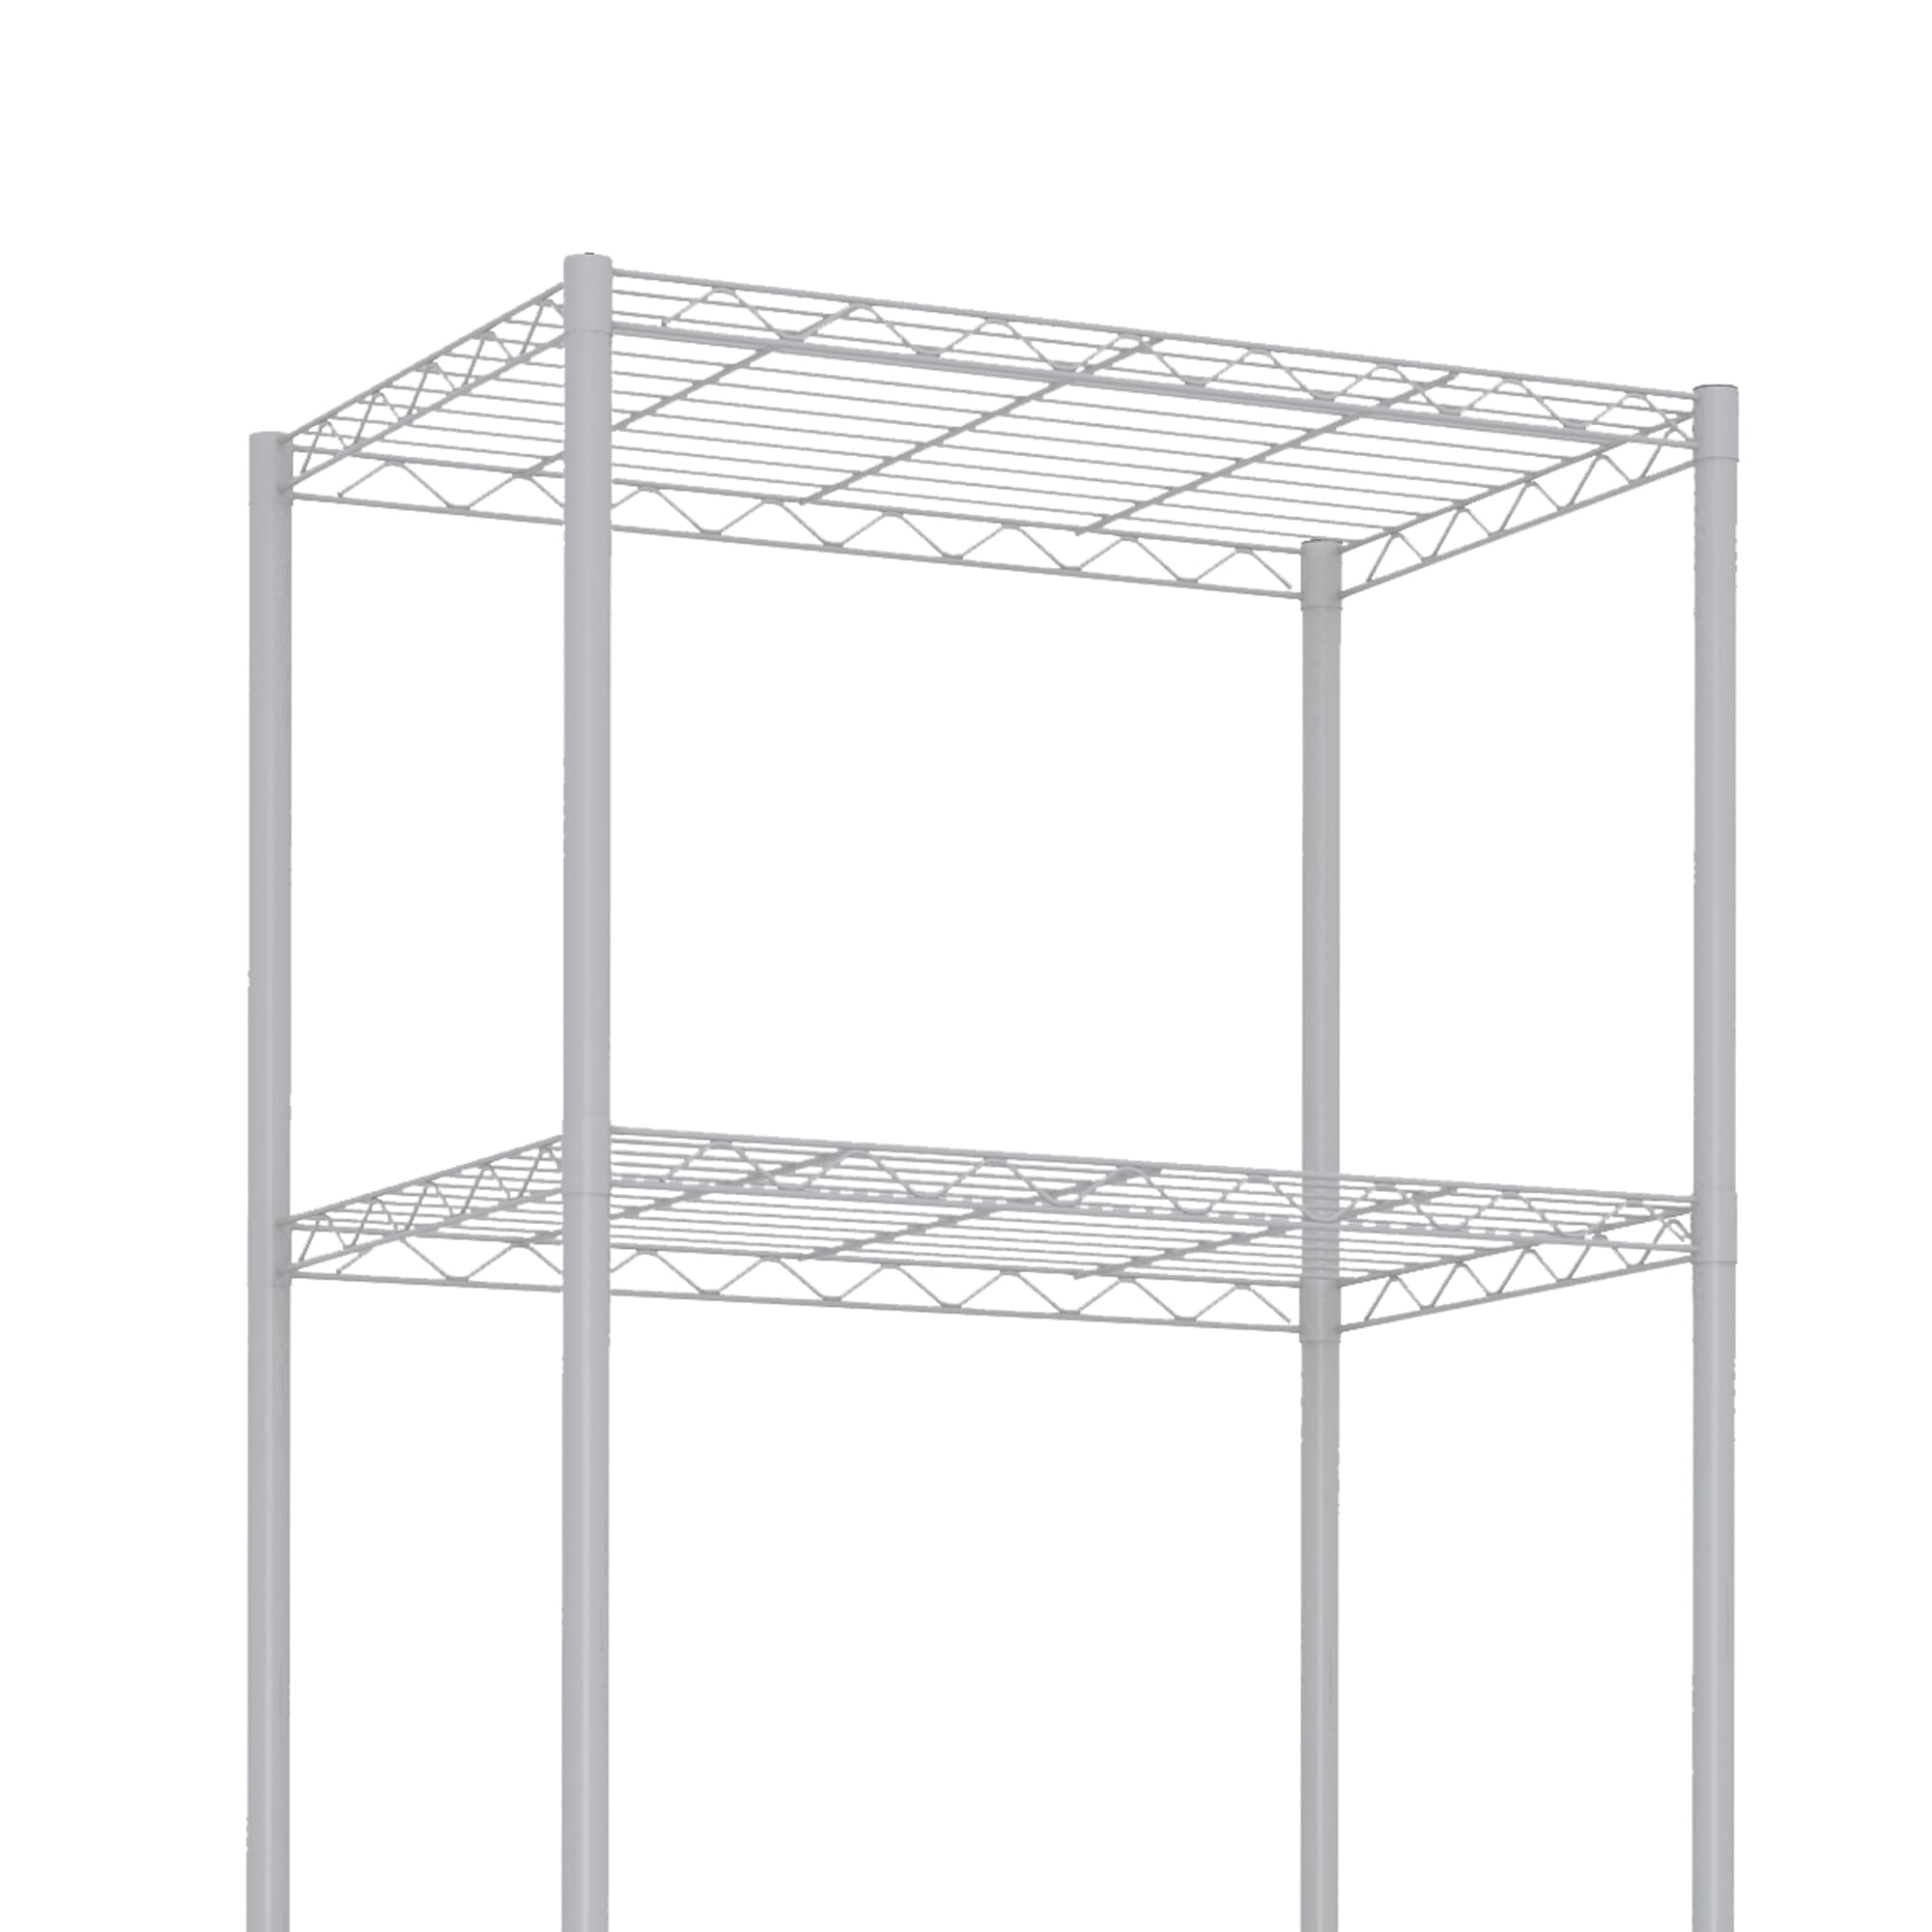 Home Basics 5 Tier Metal Wire Shelf, White $50.00 EACH, CASE PACK OF 4